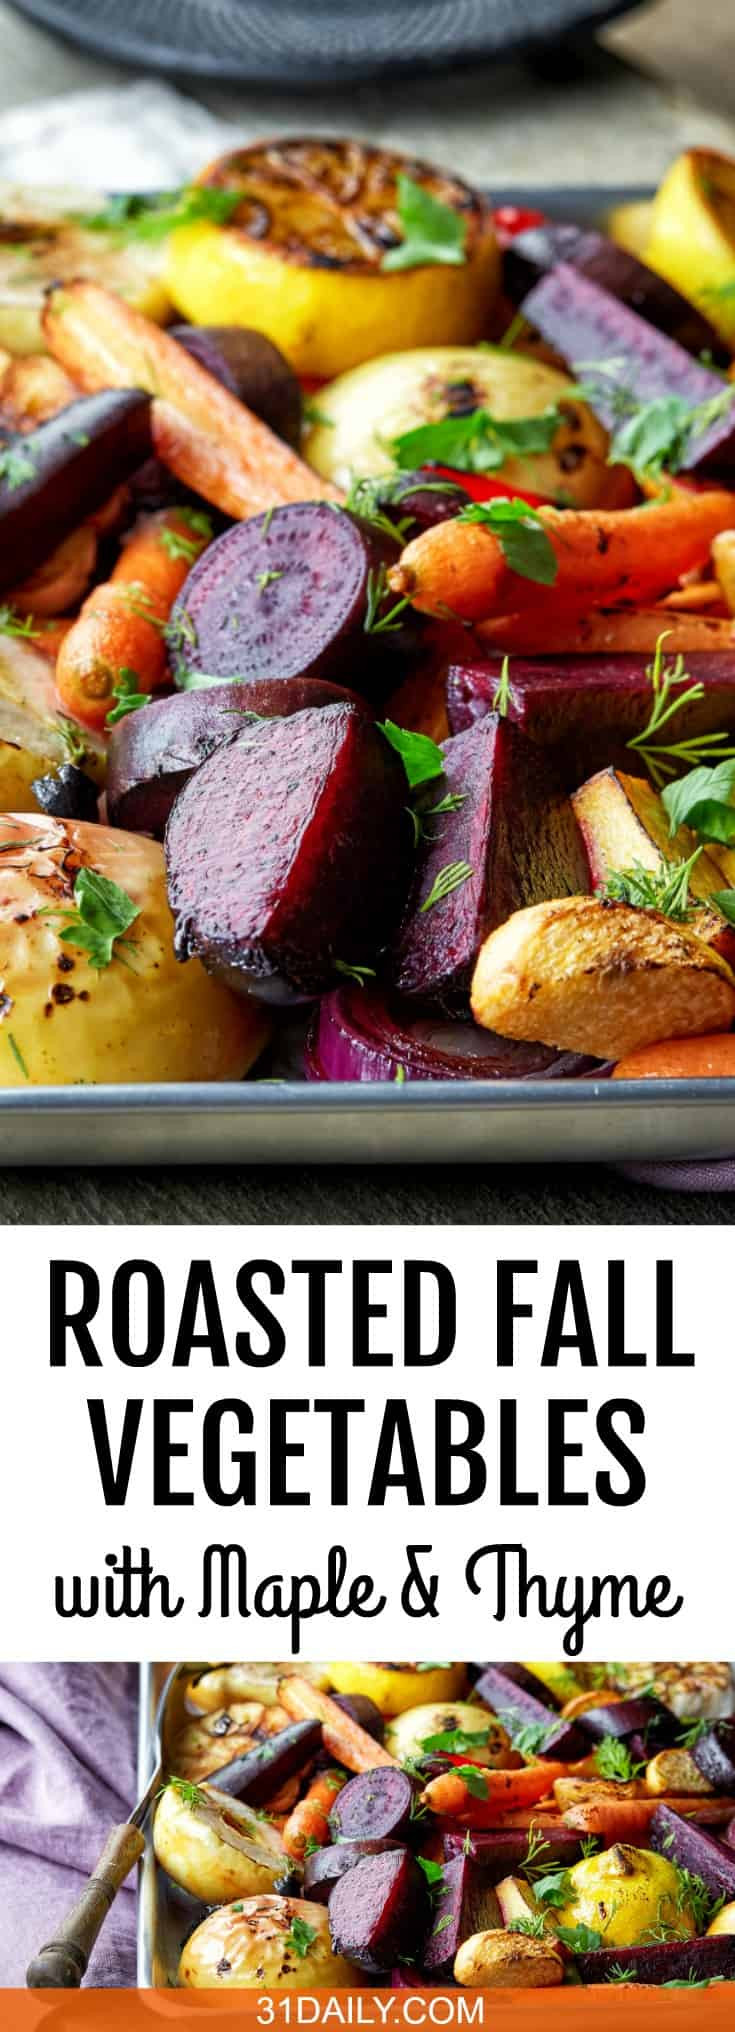 Roasted Fall Vegetables
 Roasted Fall Ve ables with Maple Thyme and Apple 31 Daily